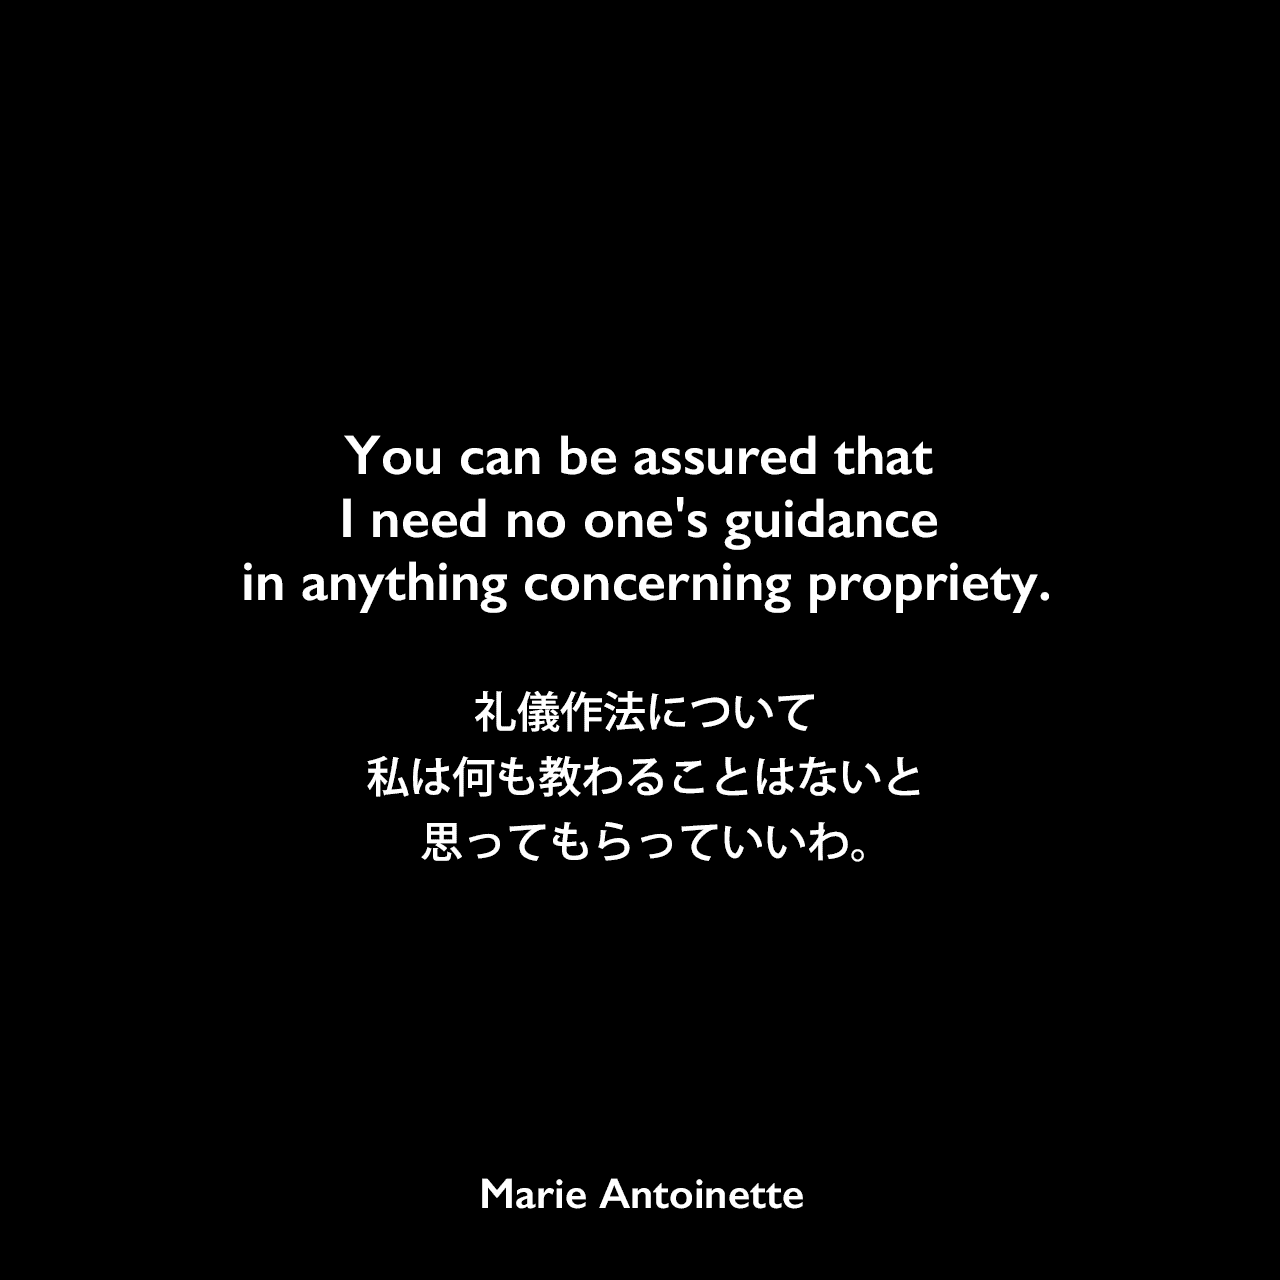 You can be assured that I need no one's guidance in anything concerning propriety.礼儀作法について私は何も教わることはないと、思ってもらっていいわ。Marie Antoinette